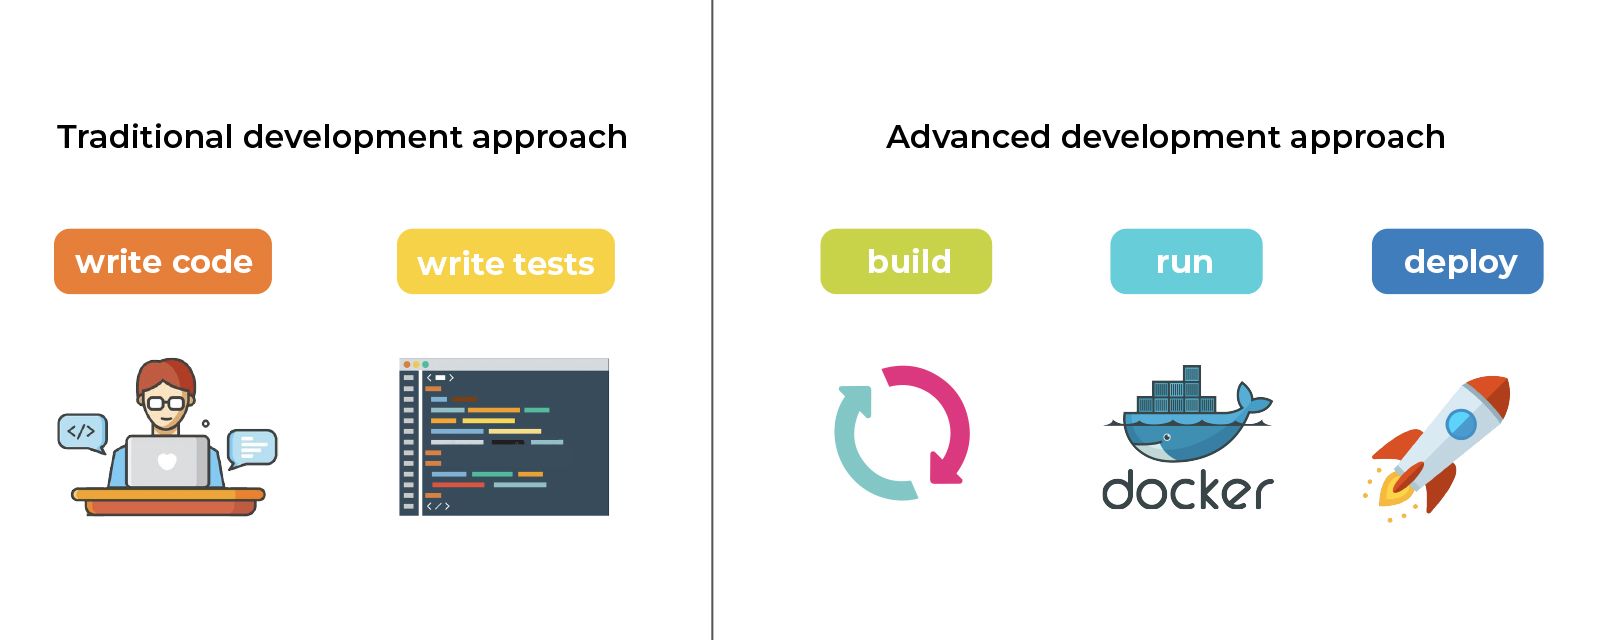 traditional development approach is write code, write test. Advanced development approach is build, run, deploy.